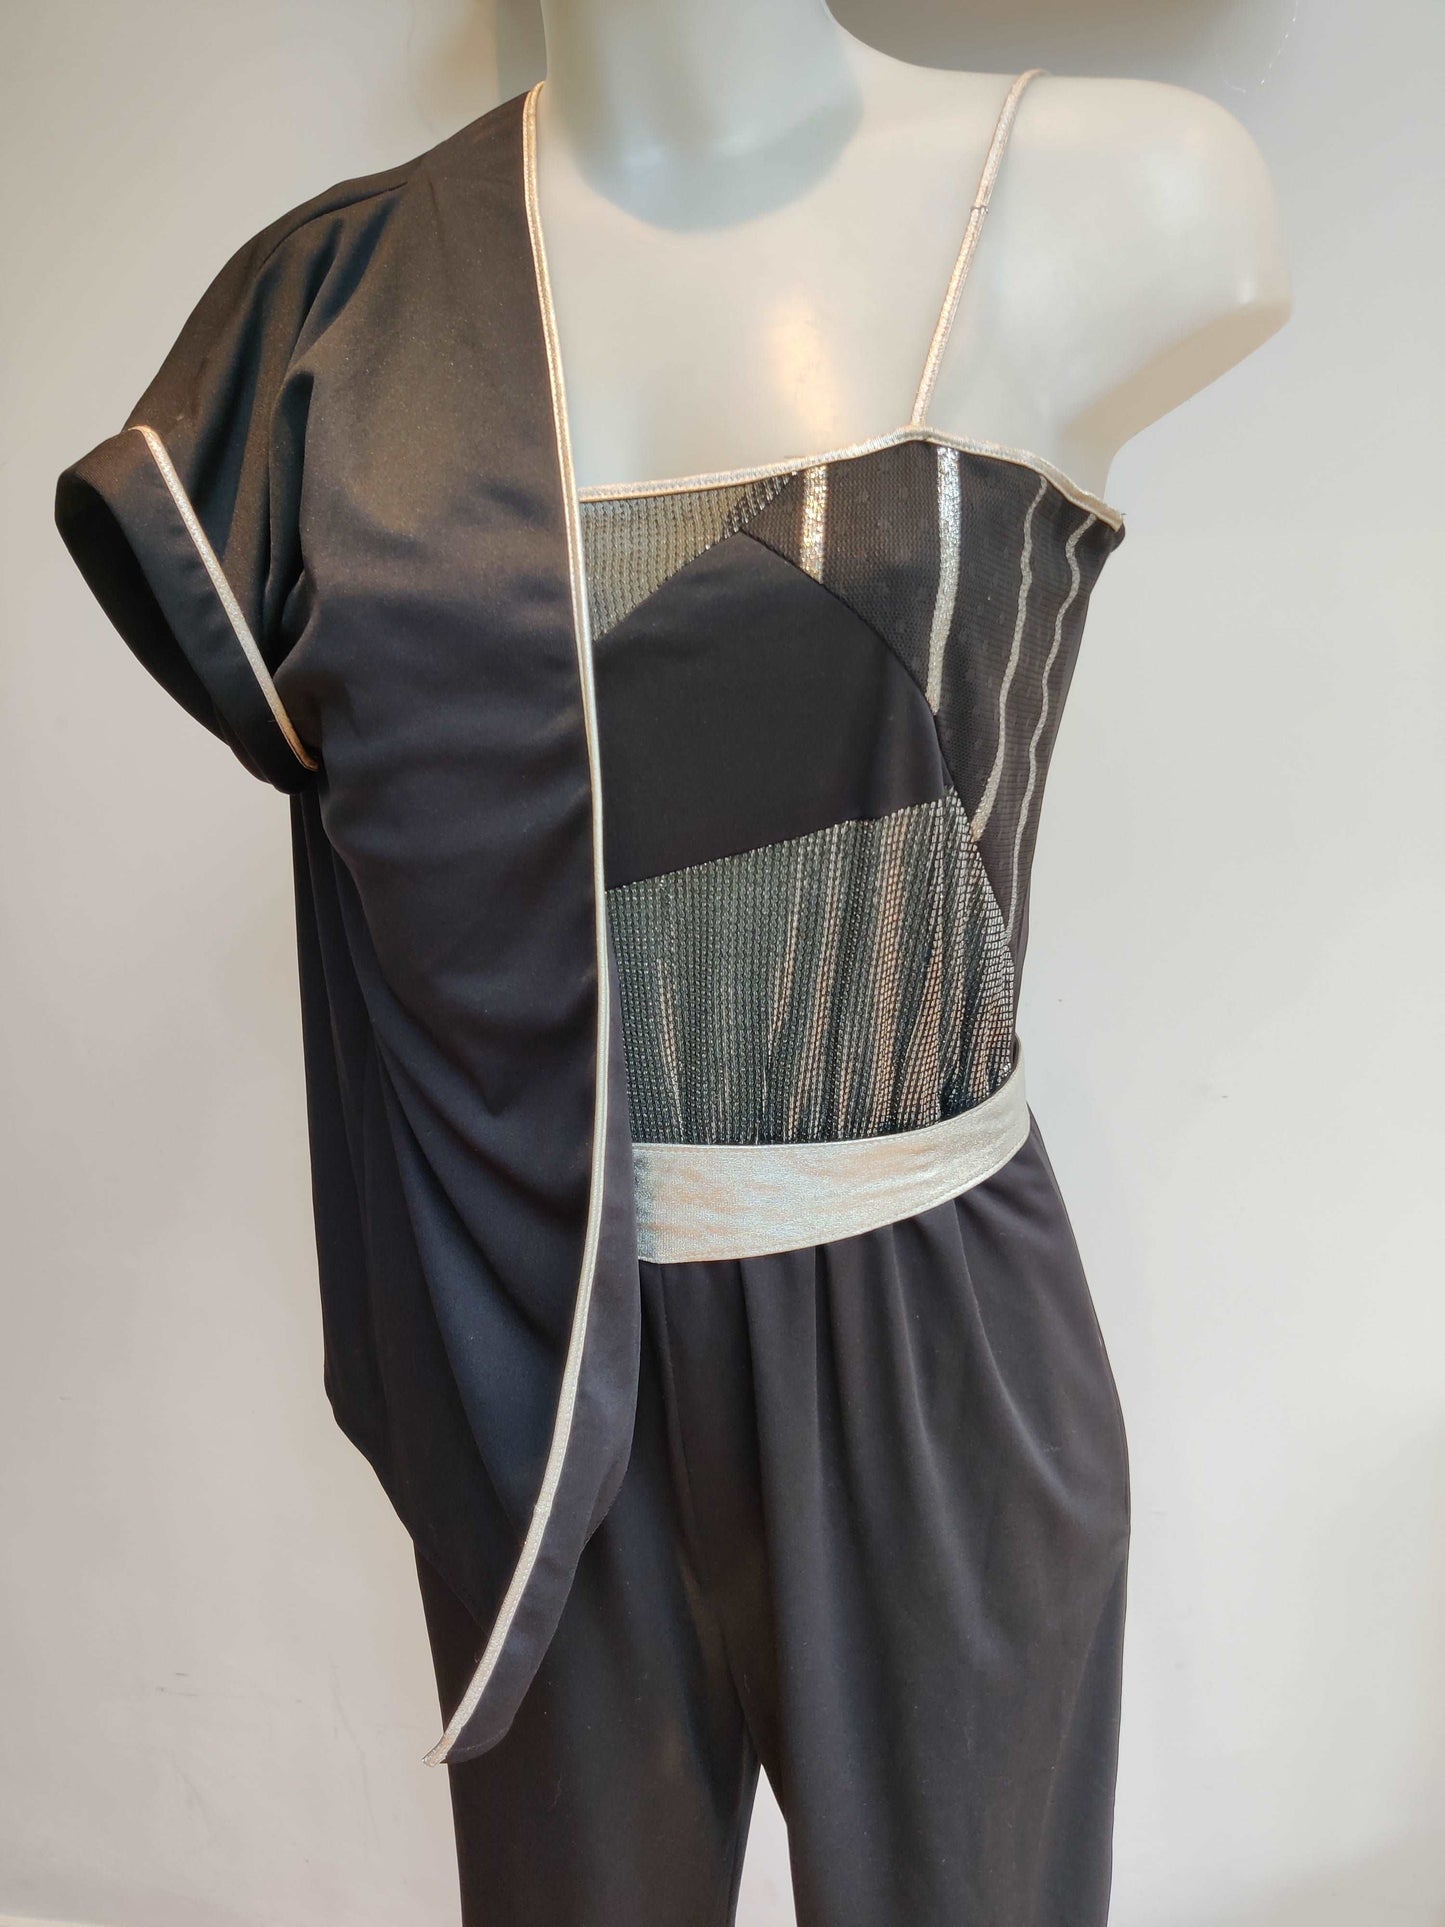 Incredible black and silver vintage jumpsuit with matching belt. 